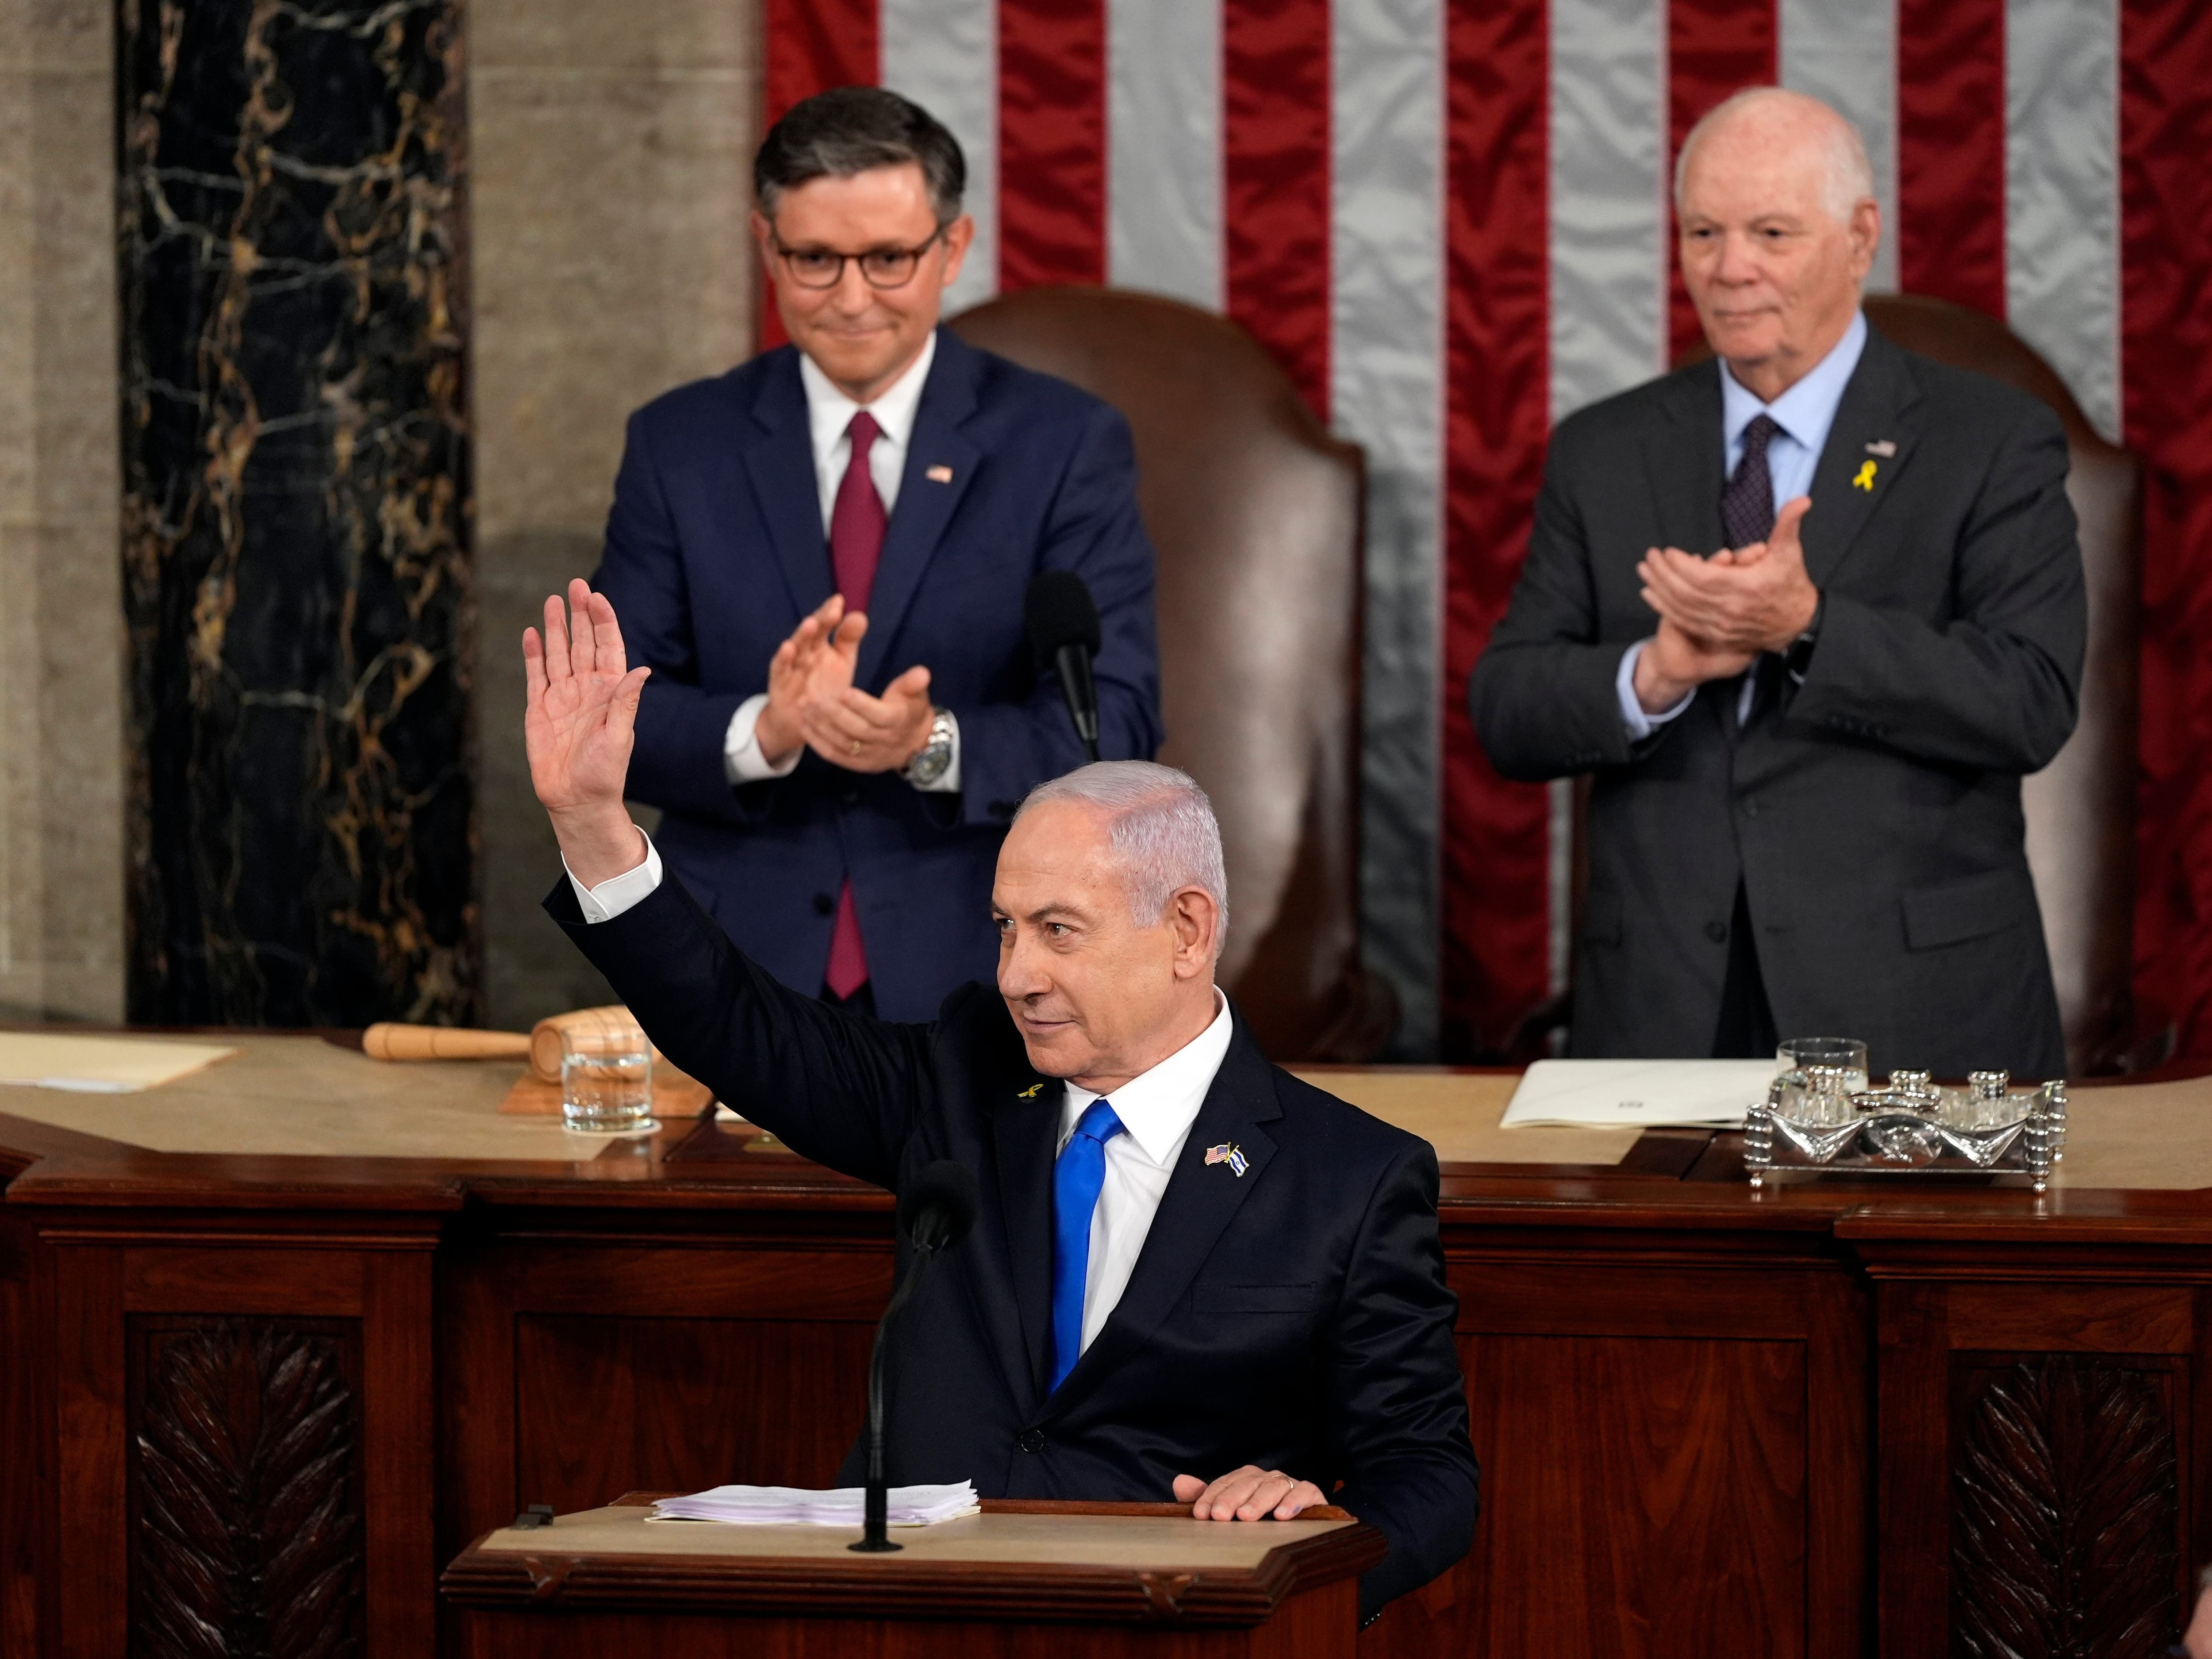 Netanyahu to meet Biden and Harris at crucial moment for US and Israel